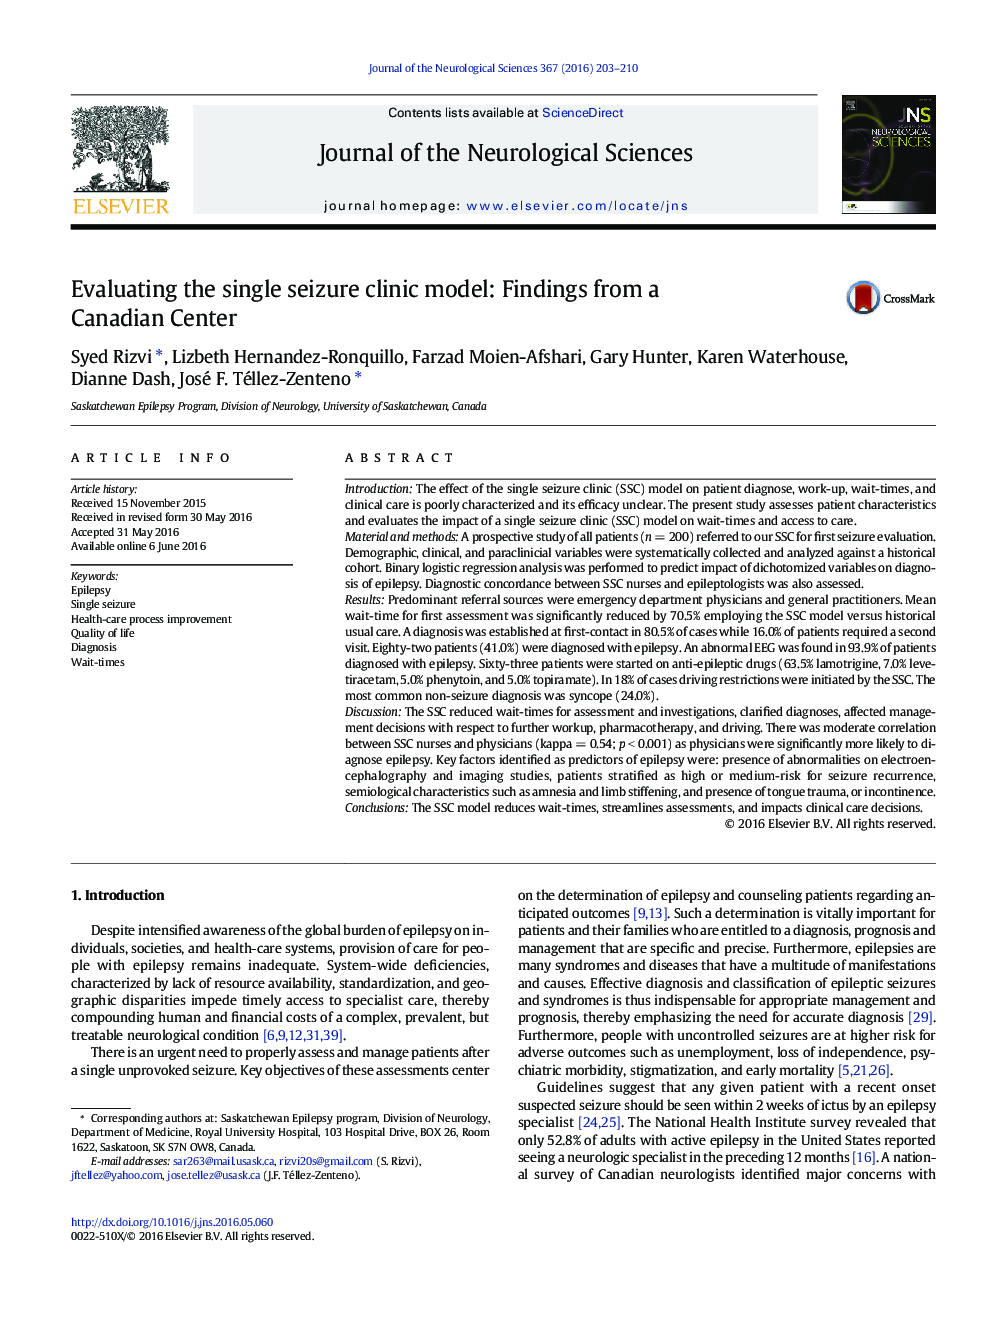 Evaluating the single seizure clinic model: Findings from a Canadian Center